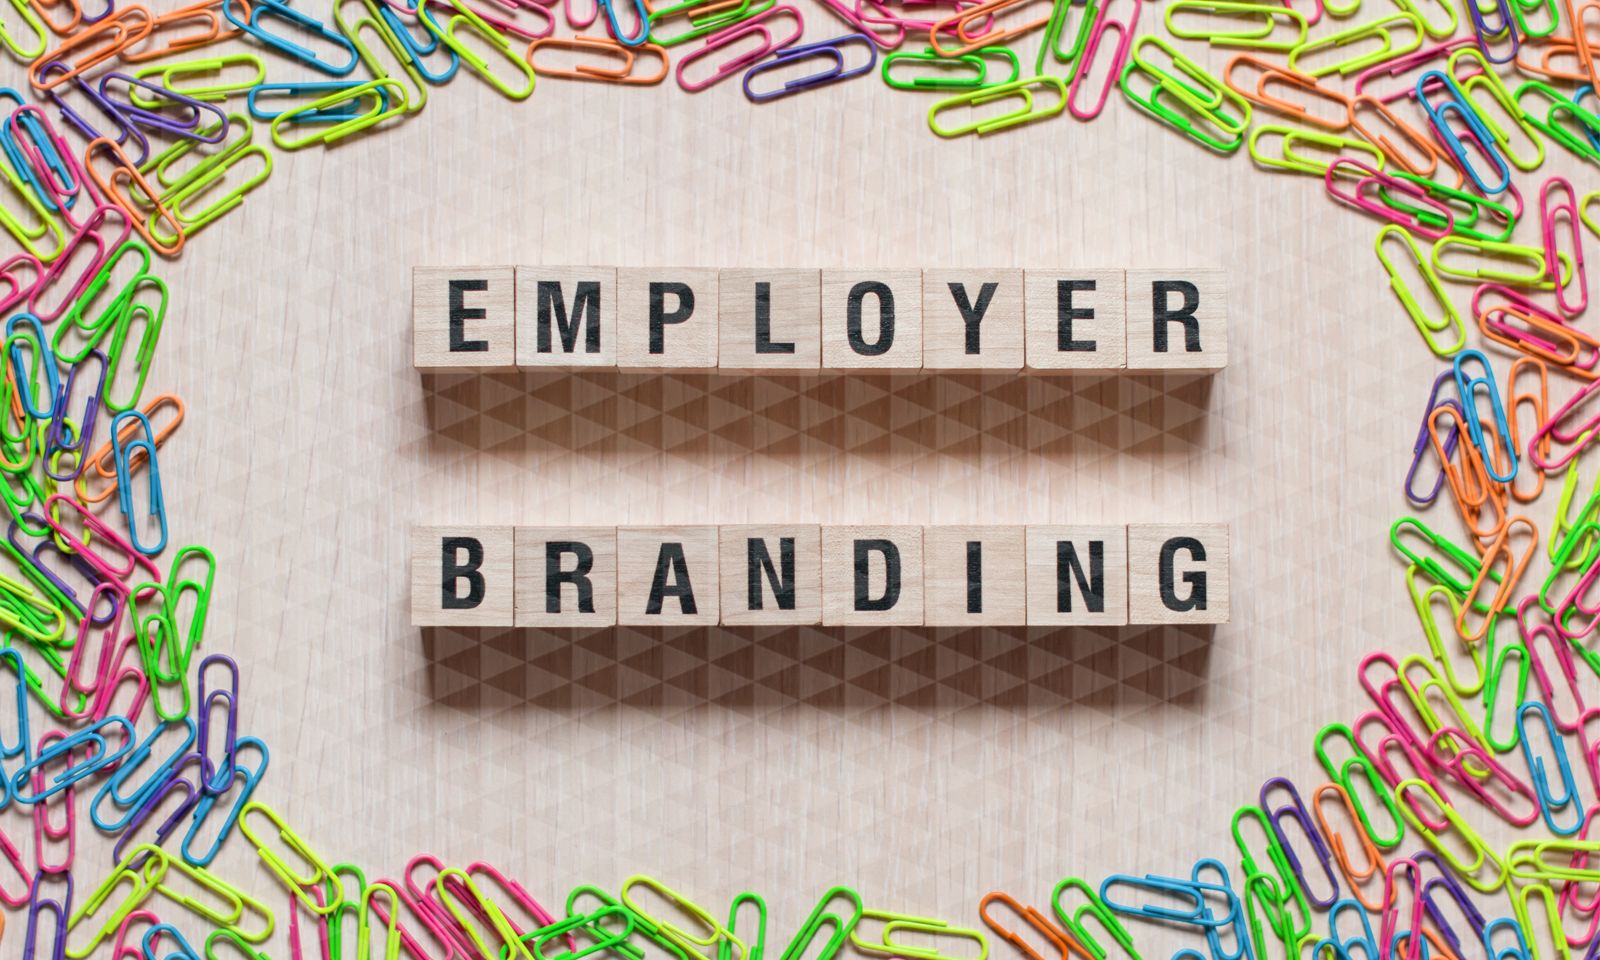 In an Employees’ Job Market, Your Employer Brand Means Everything